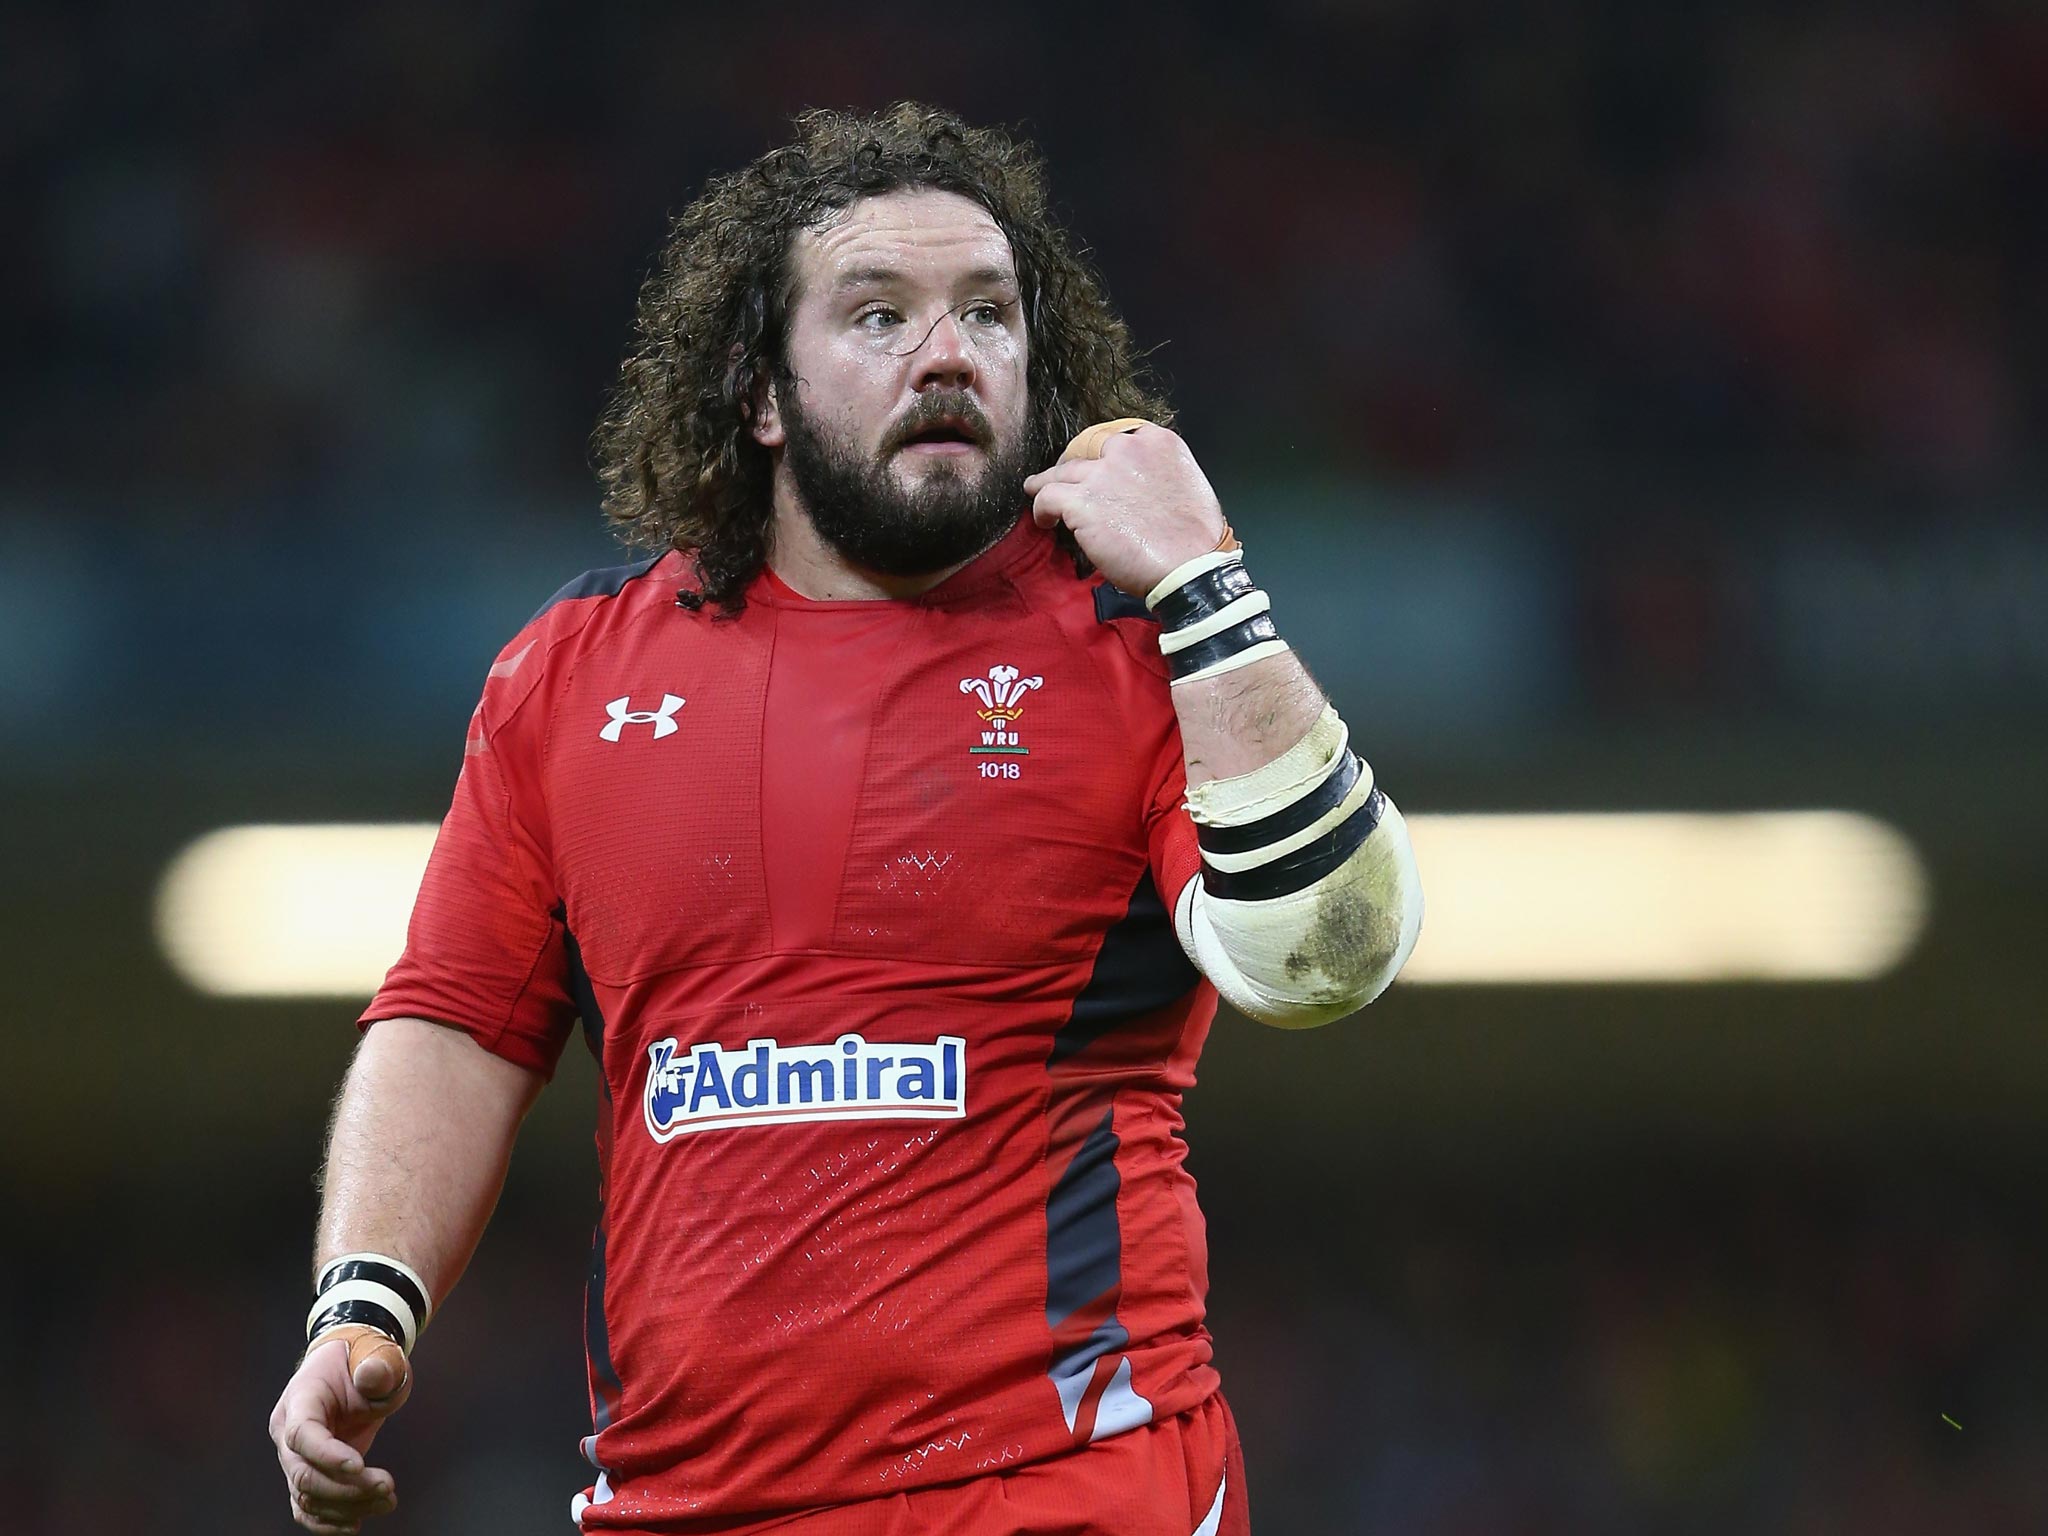 Tight-head prop Adam Jones has been dropped from the Wales
team for the first time since 2007